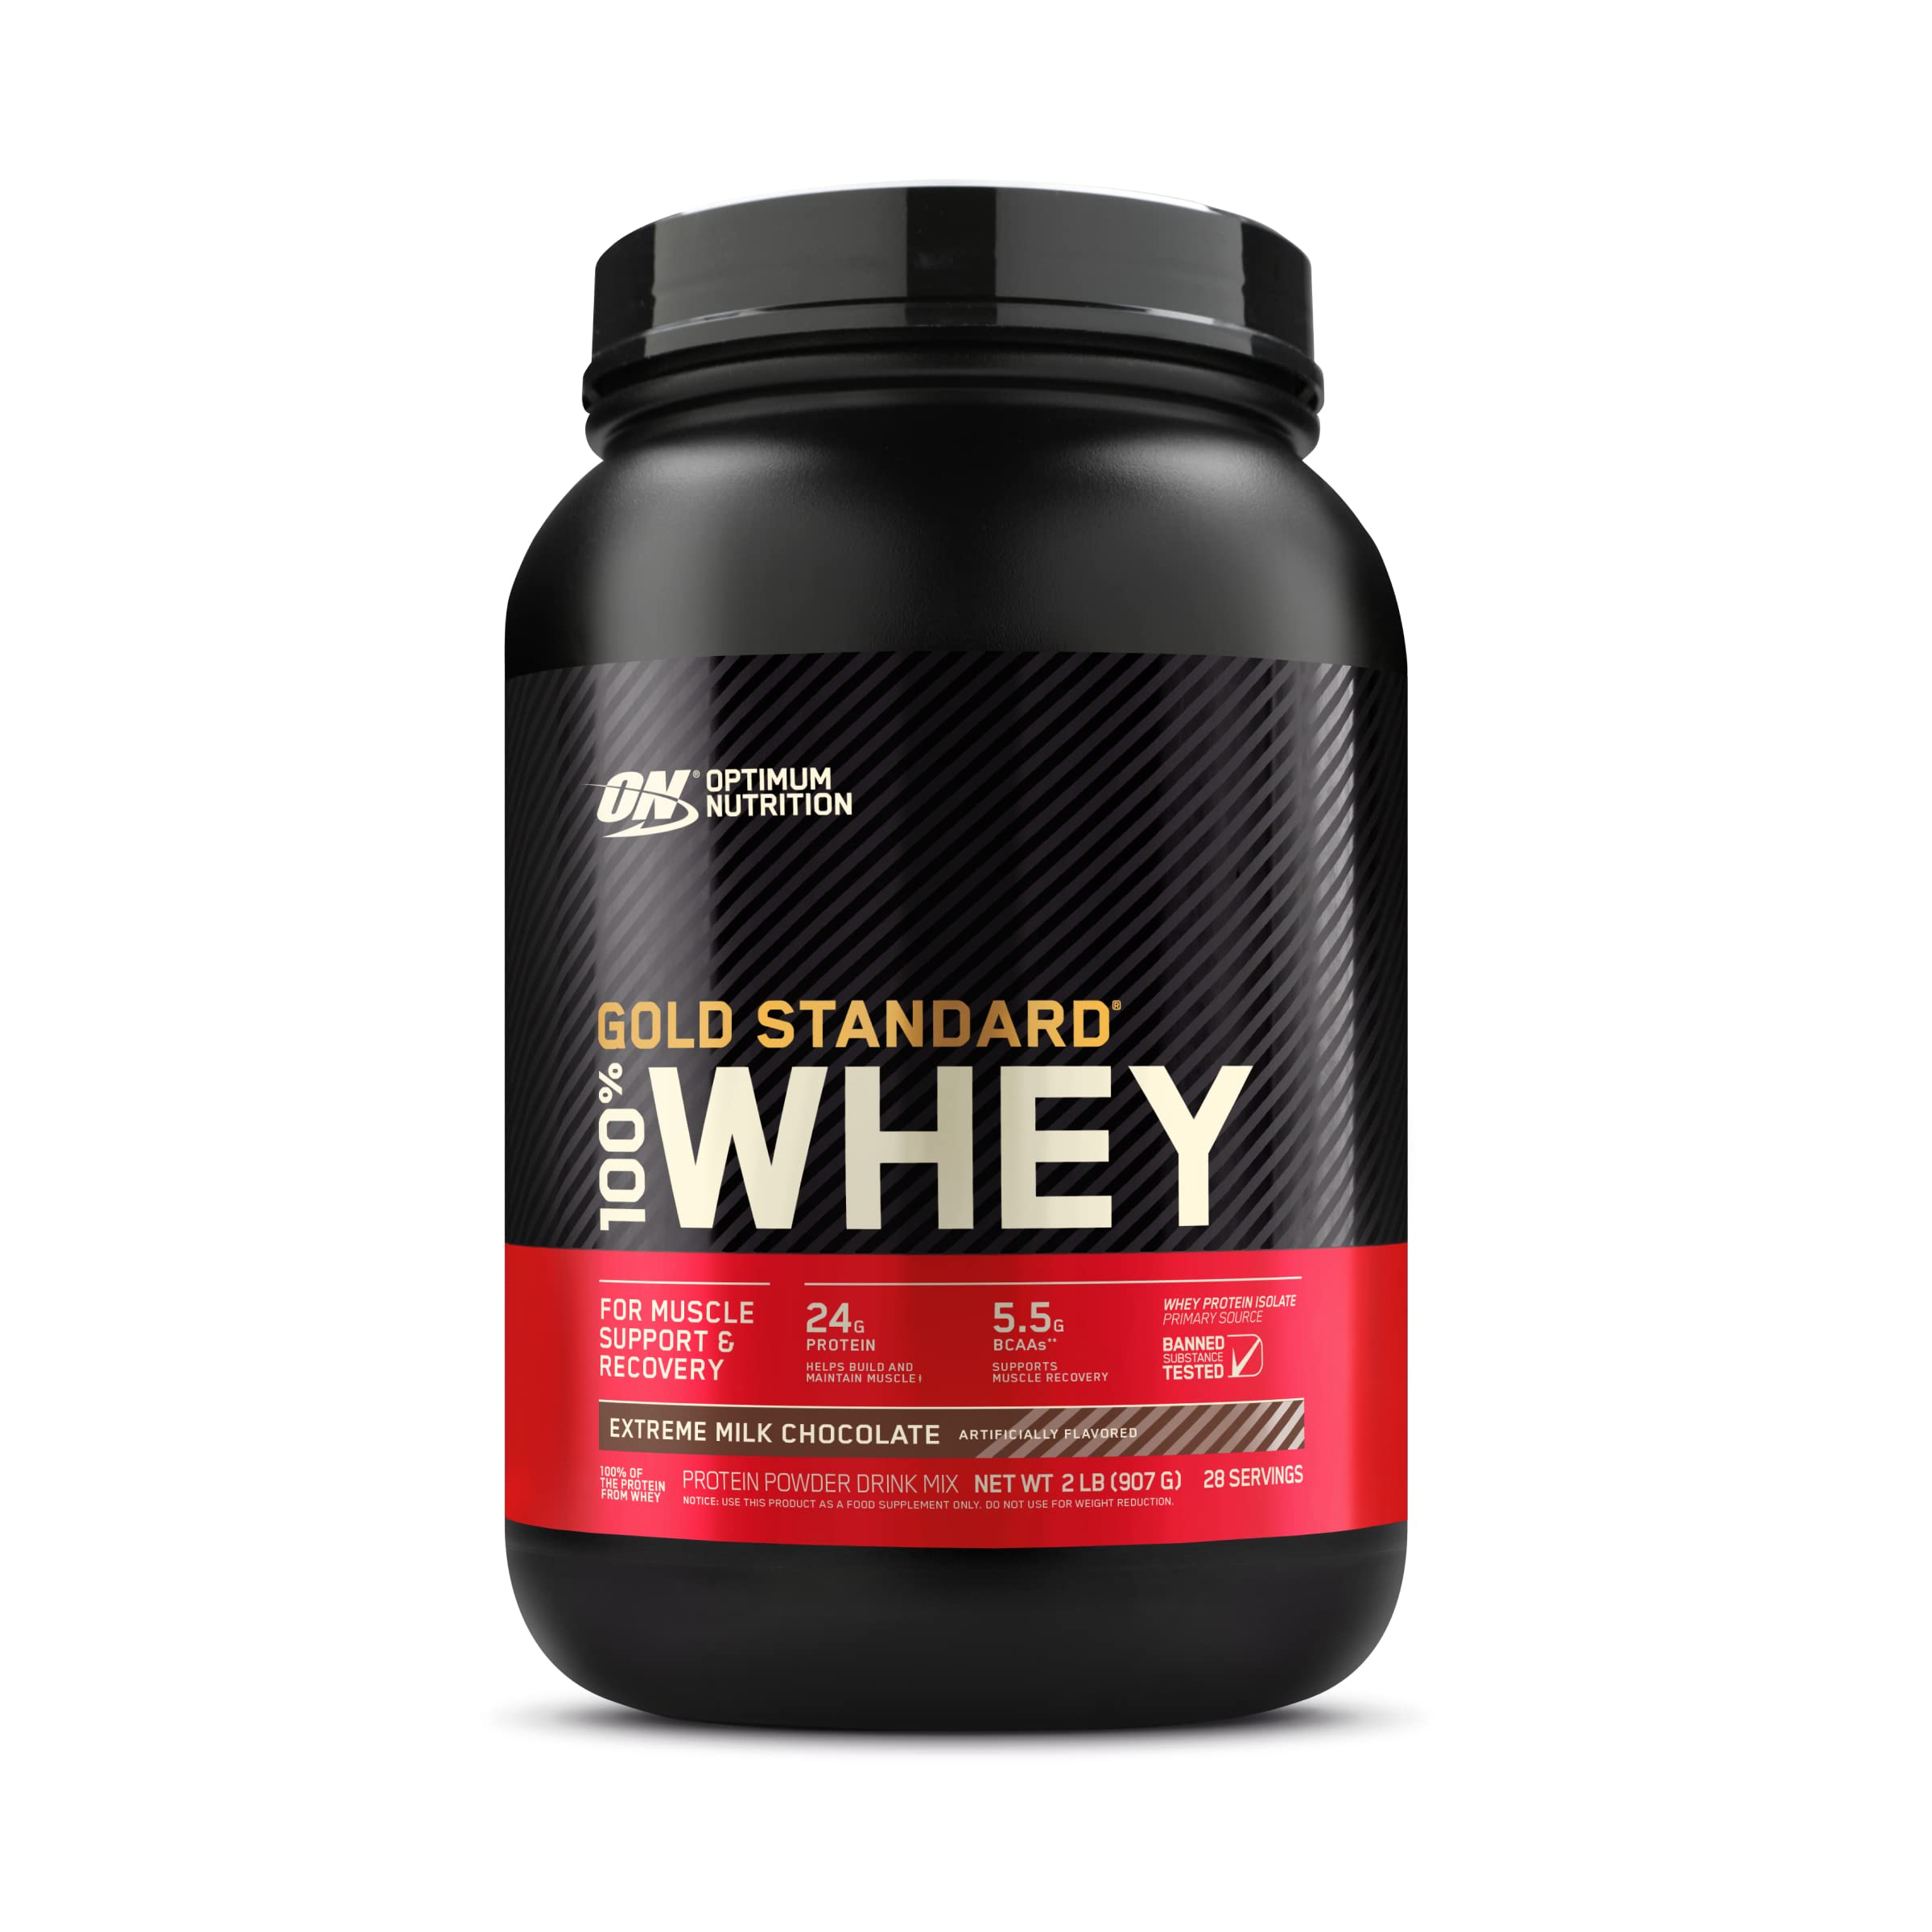 Optimum Nutrition (ON) Gold Standard 100% Whey Protein Powder Primary Source Isolate, 24 Grams of Protein for Muscle Support and Recovery - Extreme Milk Chocolate, 2 Lbs, 28 Servings (907 Grams)